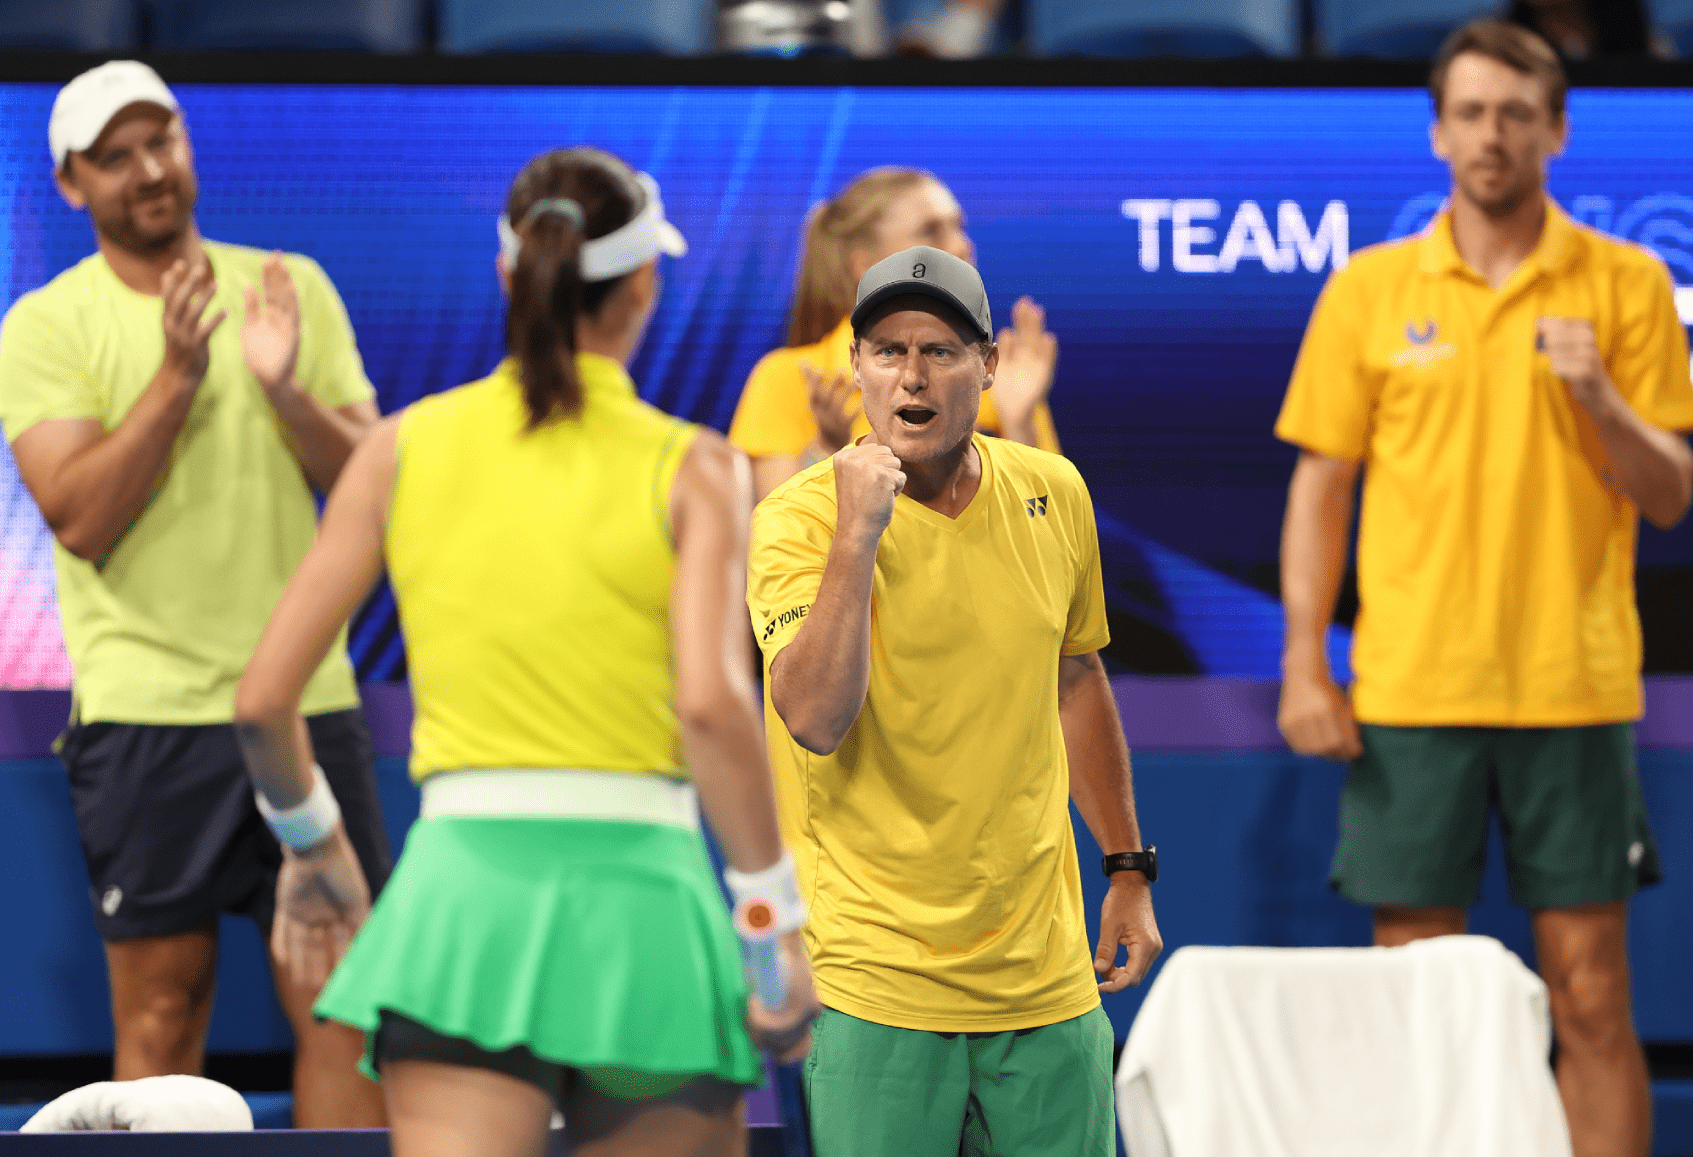 Team Australia captain Lleyton Hewitt congratulates Ajla Tomljanovic after winning a game in her singles match against Jessica Pegula of Team USA during day four of the 2024 United Cup at RAC Arena on January 01, 2024 in Perth, Australia. (Photo by Paul Kane/Getty Images)